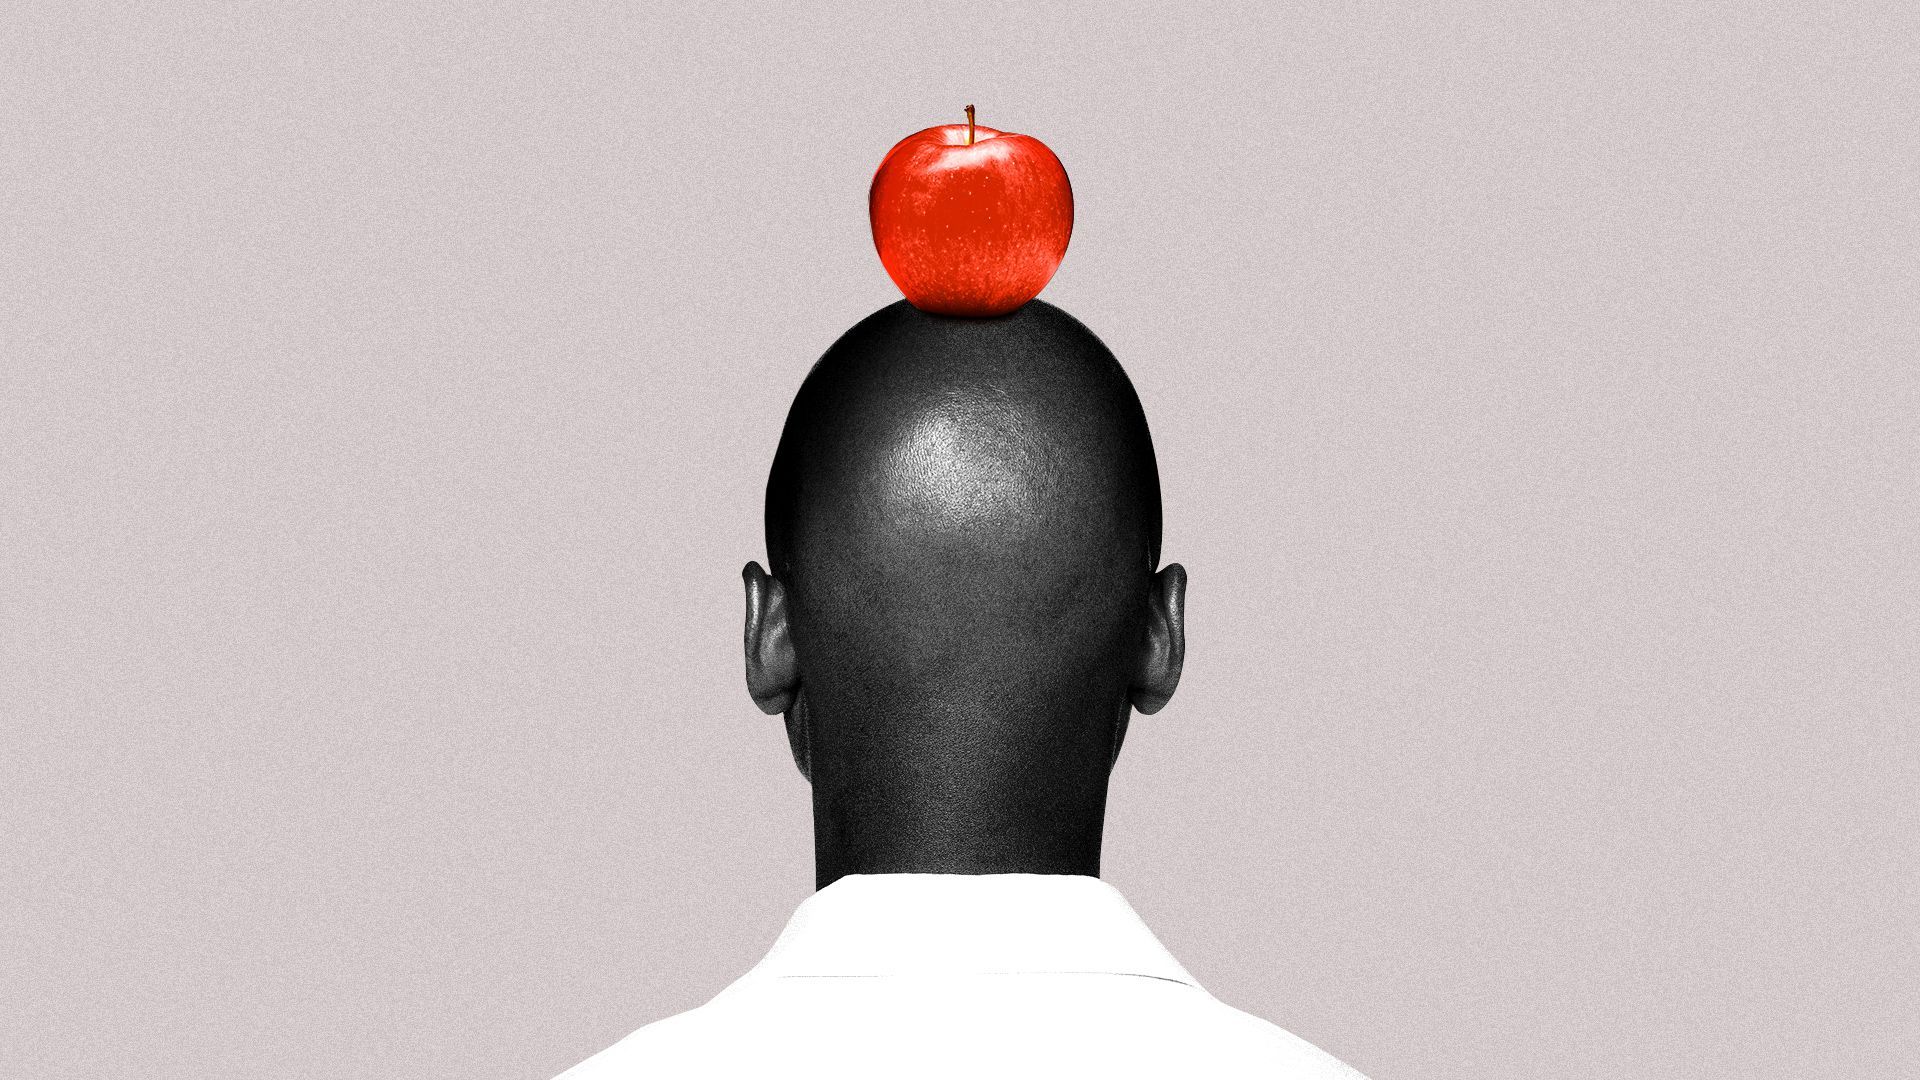 Illustration of the back of a man's head with an apple on top.   